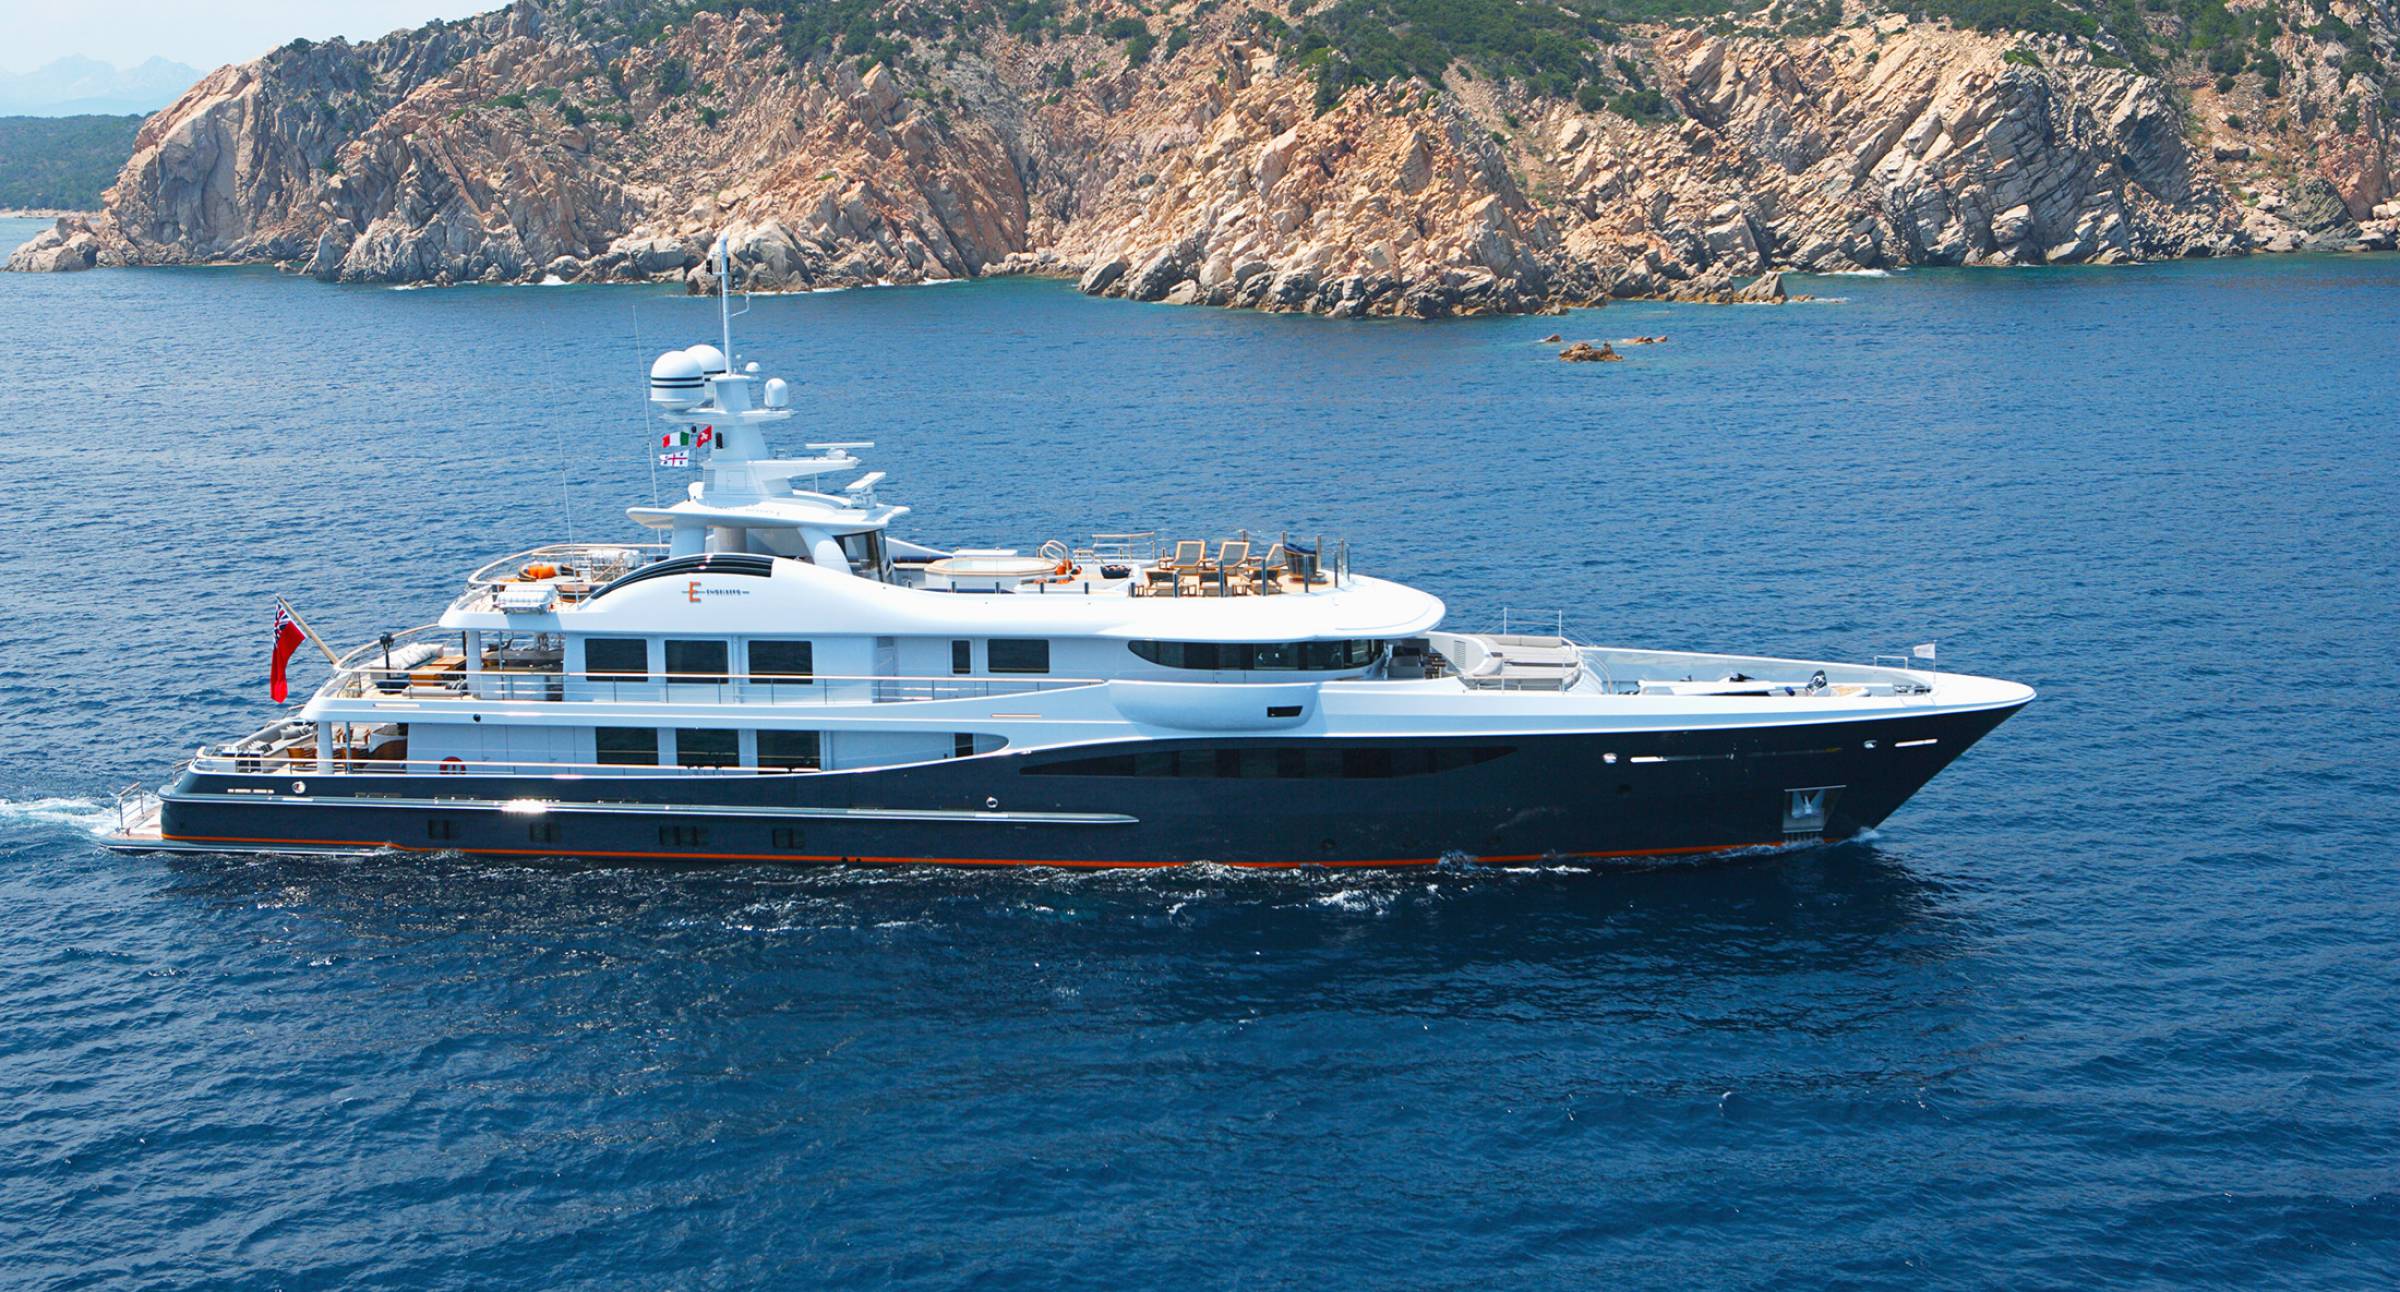 180 Limited Edition Amels 180 Yacht Moored In The Mediterranean Luxury Yacht Browser By